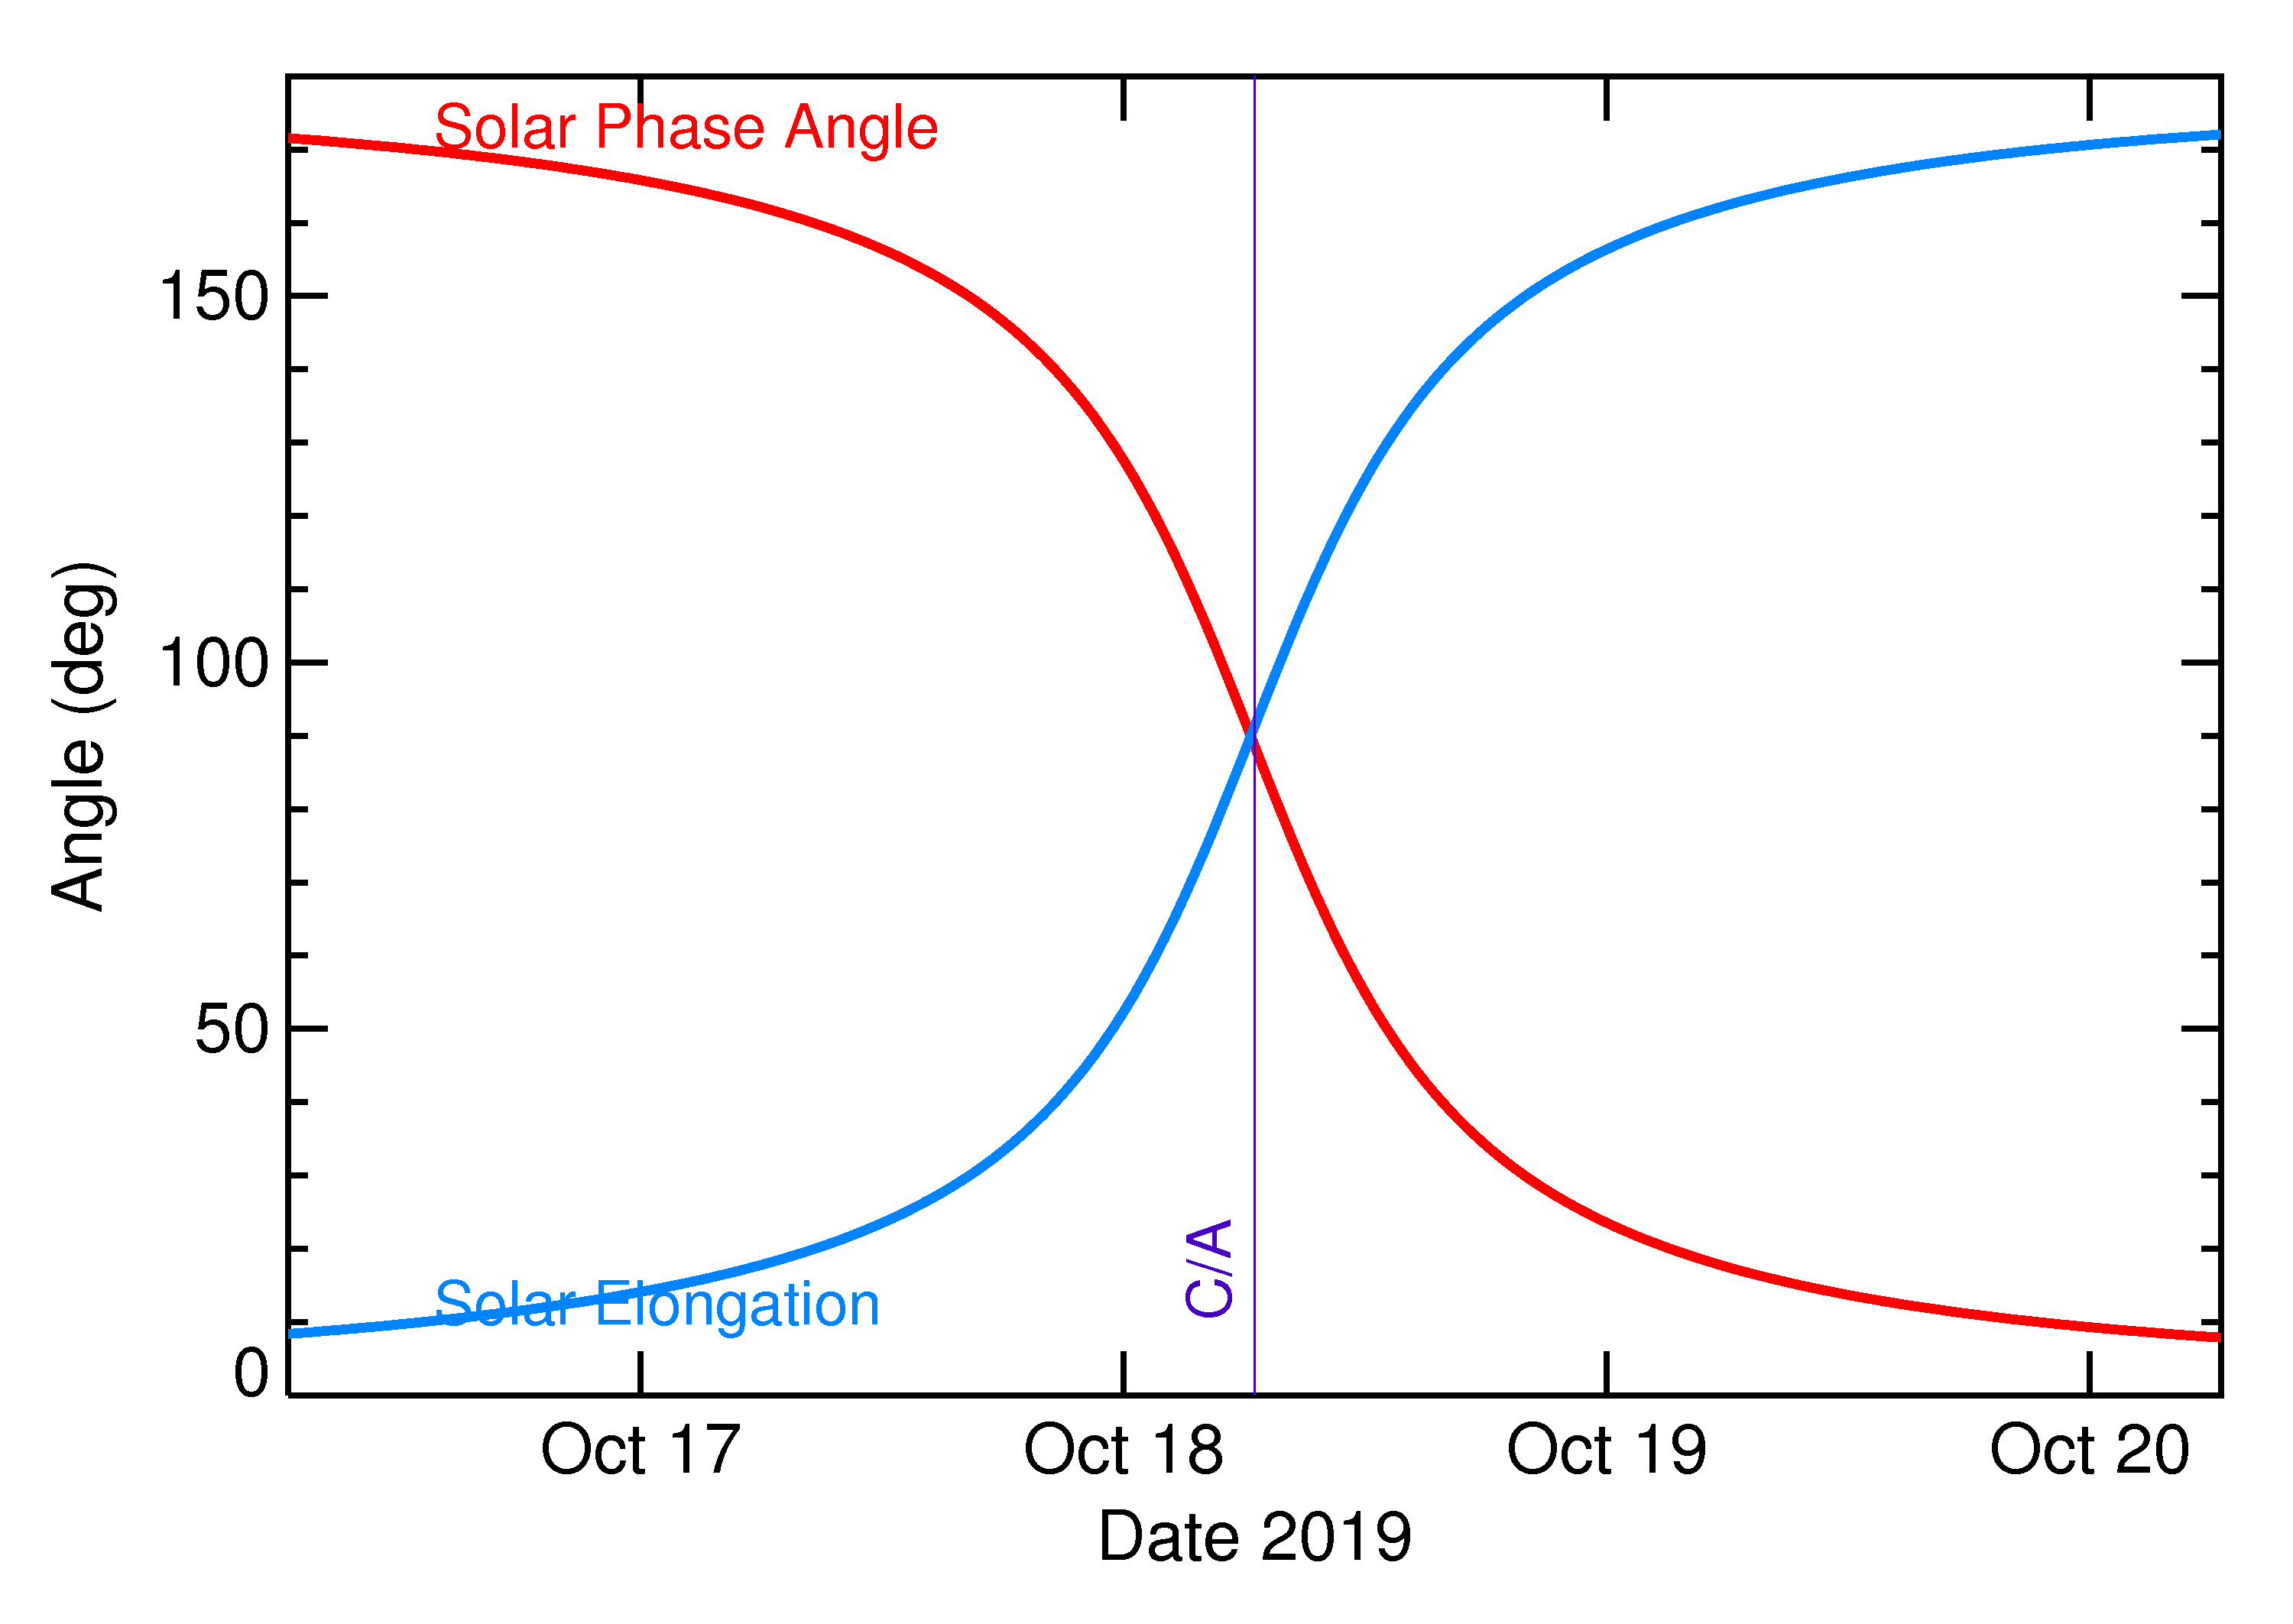 Solar Elongation and Solar Phase Angle of 2019 UU1 in the days around closest approach